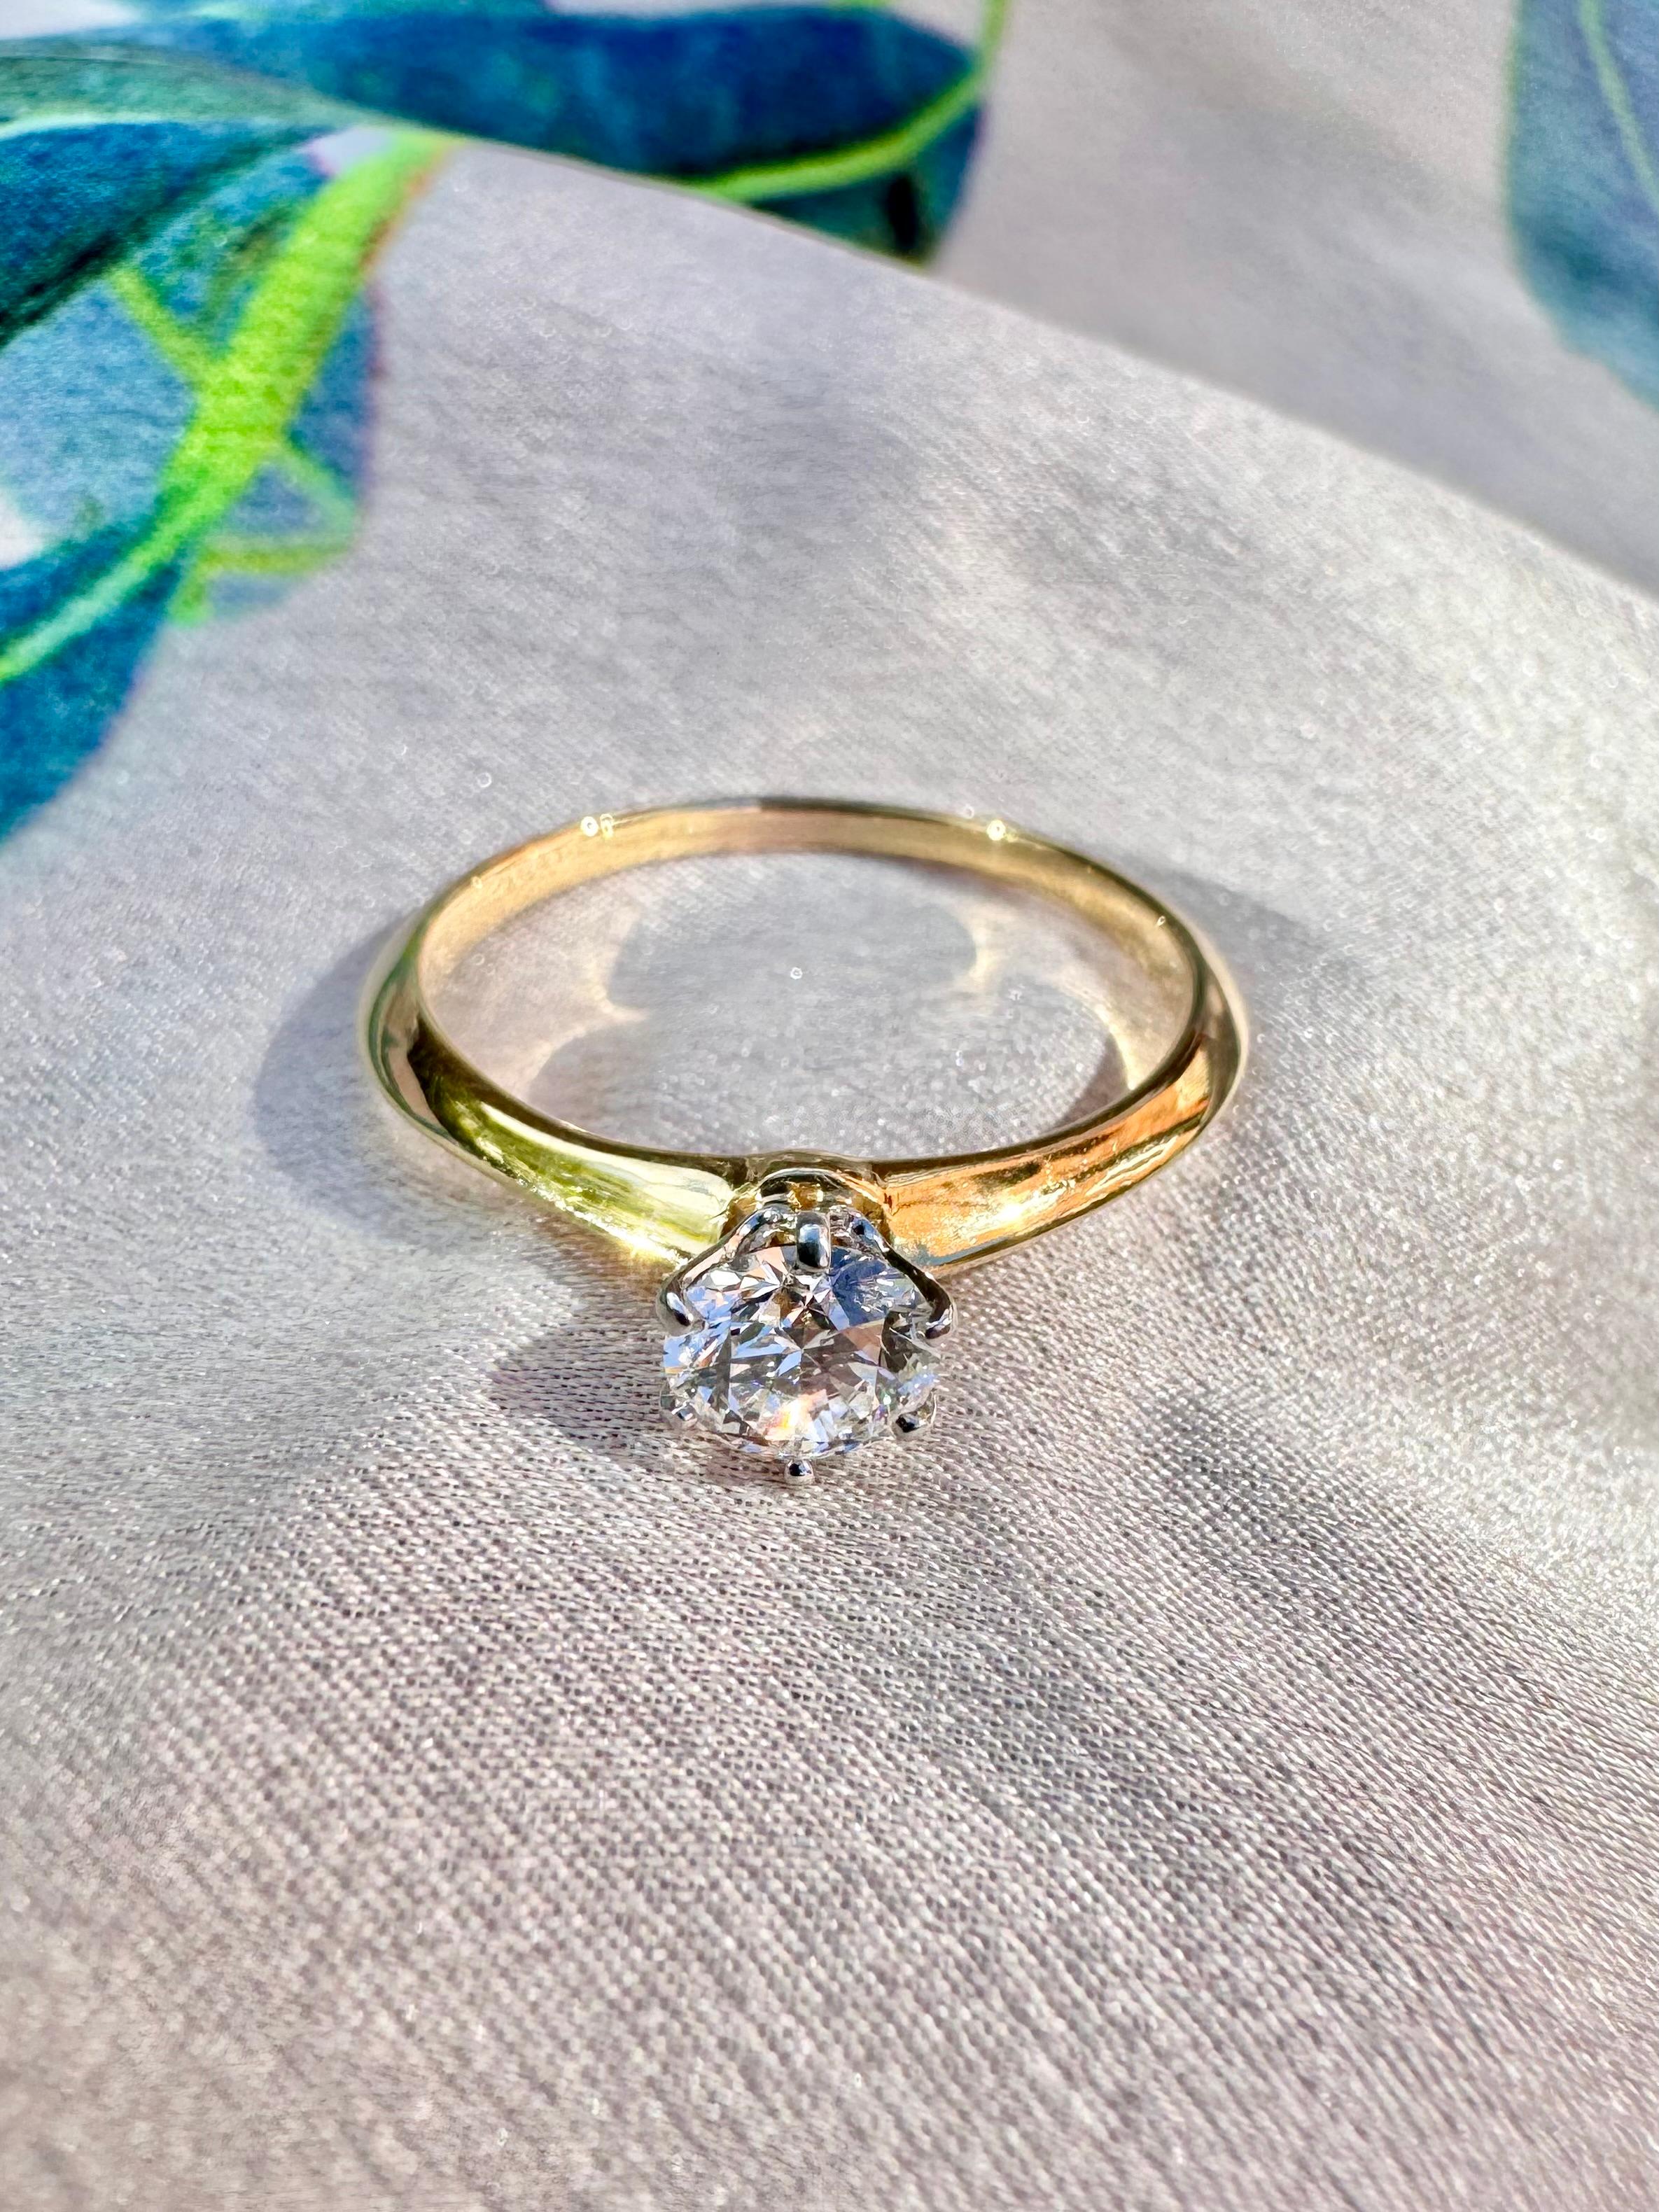 Tiffany & Co. 0.47 carat Diamond Solitaire Ring in 18K Gold In Excellent Condition For Sale In London, GB